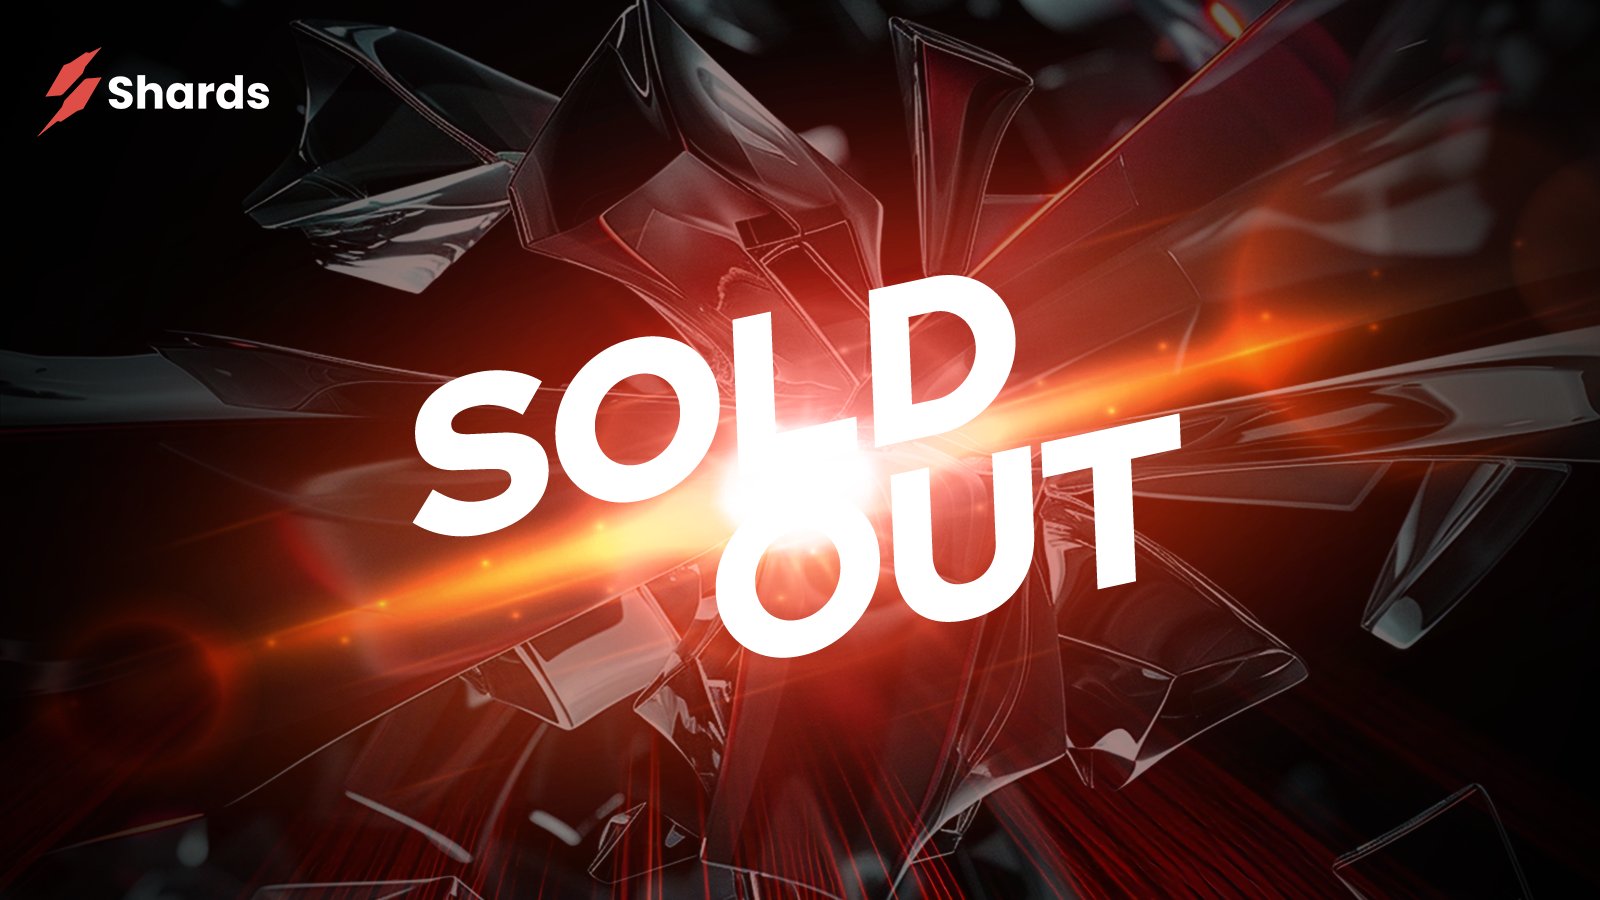 Shards sold out